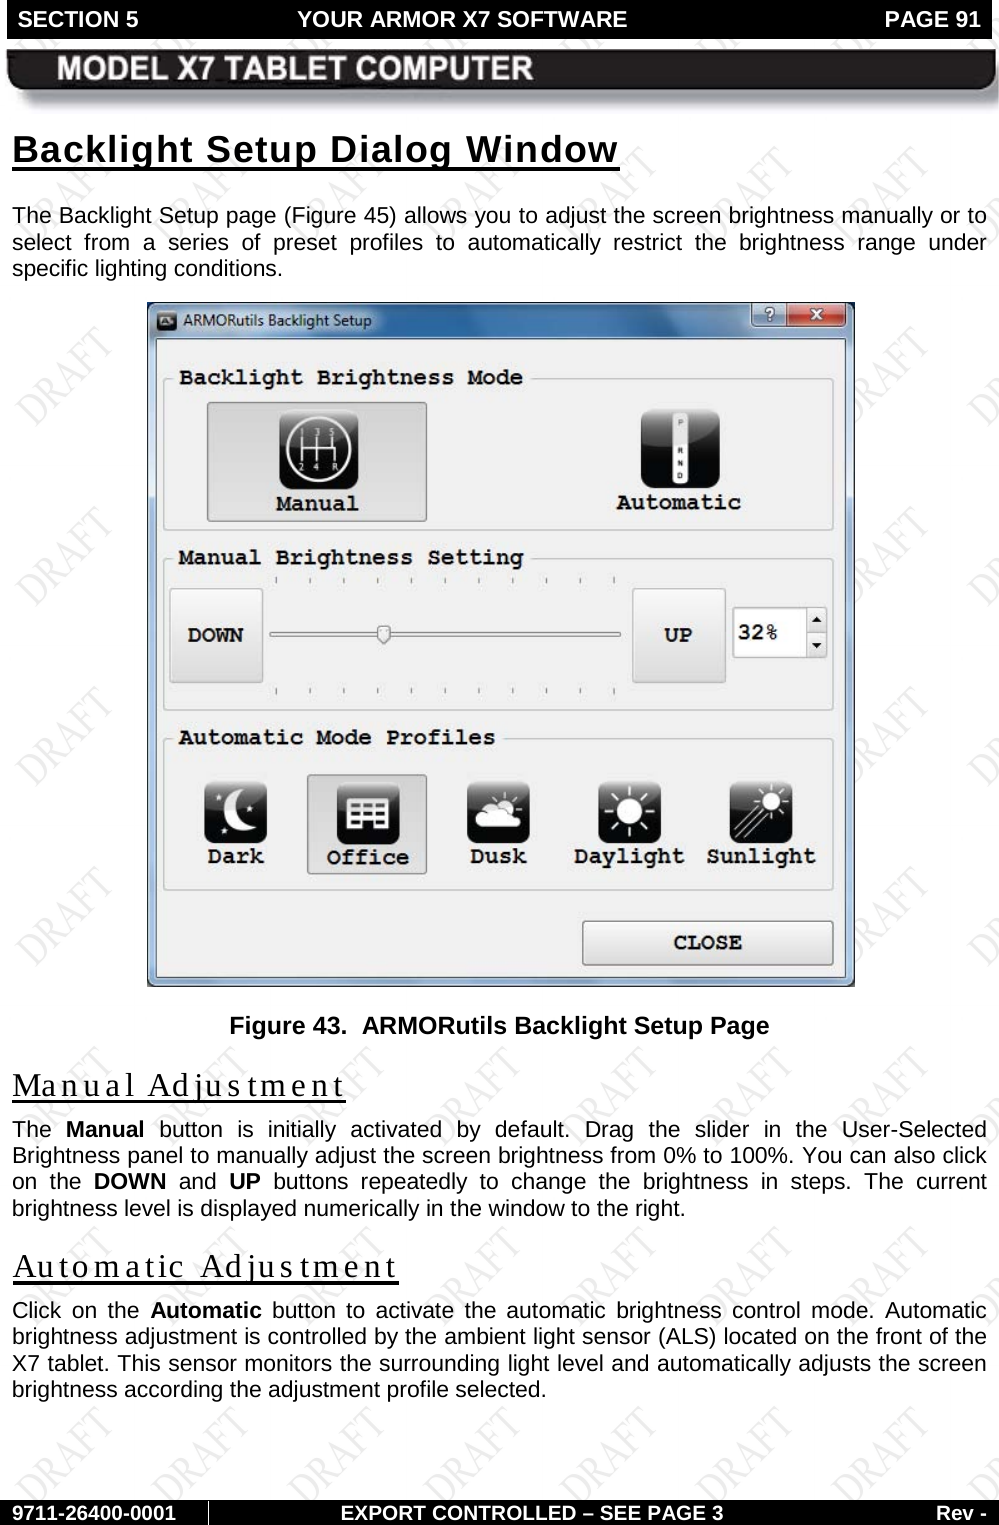 SECTION 5 YOUR ARMOR X7 SOFTWARE  PAGE 91        9711-26400-0001 EXPORT CONTROLLED – SEE PAGE 3 Rev - Backlight Setup Dialog Window The Backlight Setup page (Figure 45) allows you to adjust the screen brightness manually or to select from a series of preset profiles to automatically restrict the brightness range under specific lighting conditions.   Figure 43.  ARMORutils Backlight Setup Page Manual Adjustment The  Manual button is initially activated by default. Drag the slider in the User-Selected Brightness panel to manually adjust the screen brightness from 0% to 100%. You can also click on the DOWN and  UP buttons repeatedly to change the brightness in steps. The current brightness level is displayed numerically in the window to the right. Automatic Adjustment Click on the Automatic button to activate the automatic brightness control mode. Automatic brightness adjustment is controlled by the ambient light sensor (ALS) located on the front of the X7 tablet. This sensor monitors the surrounding light level and automatically adjusts the screen brightness according the adjustment profile selected.    